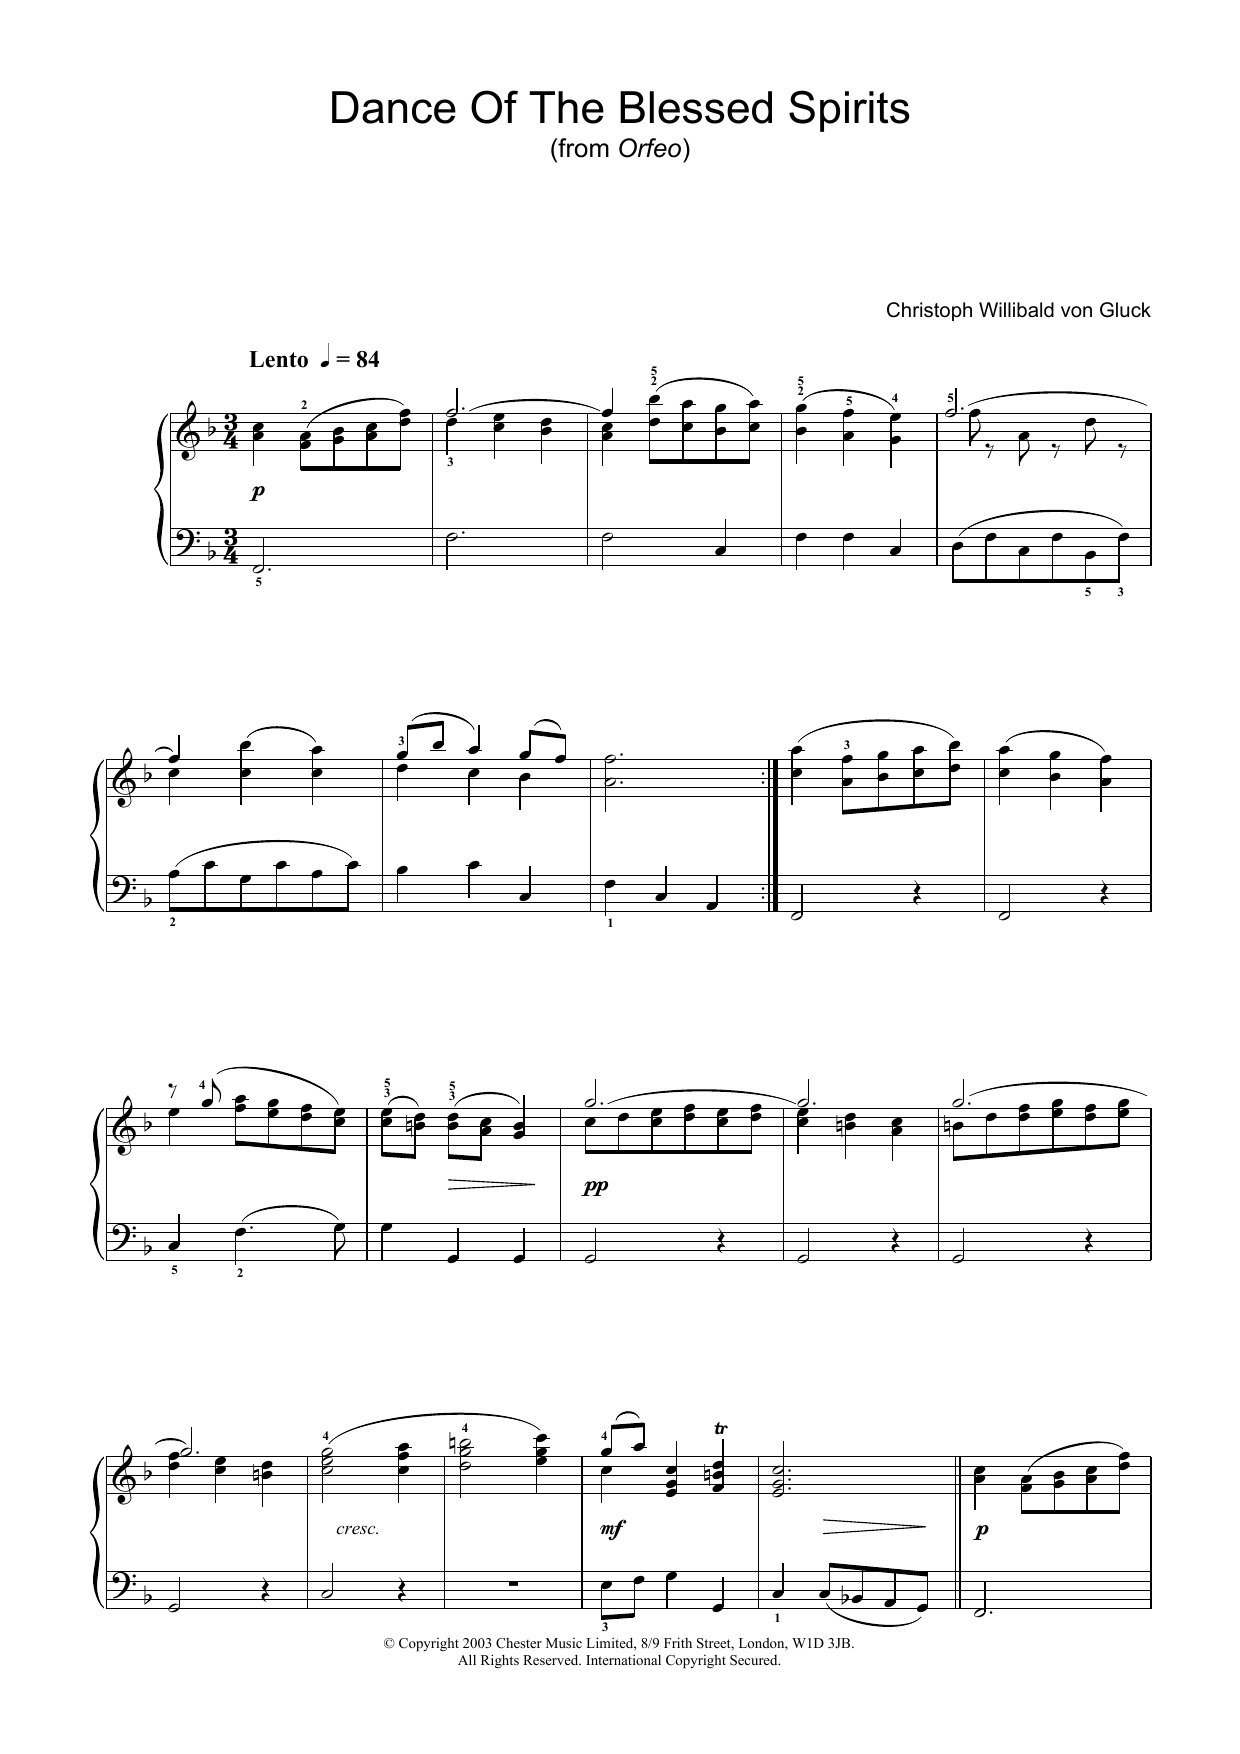 Christoph Willibald von Gluck Dance Of The Blessed Spirits (from Orfeo ed Euridice) sheet music notes and chords. Download Printable PDF.